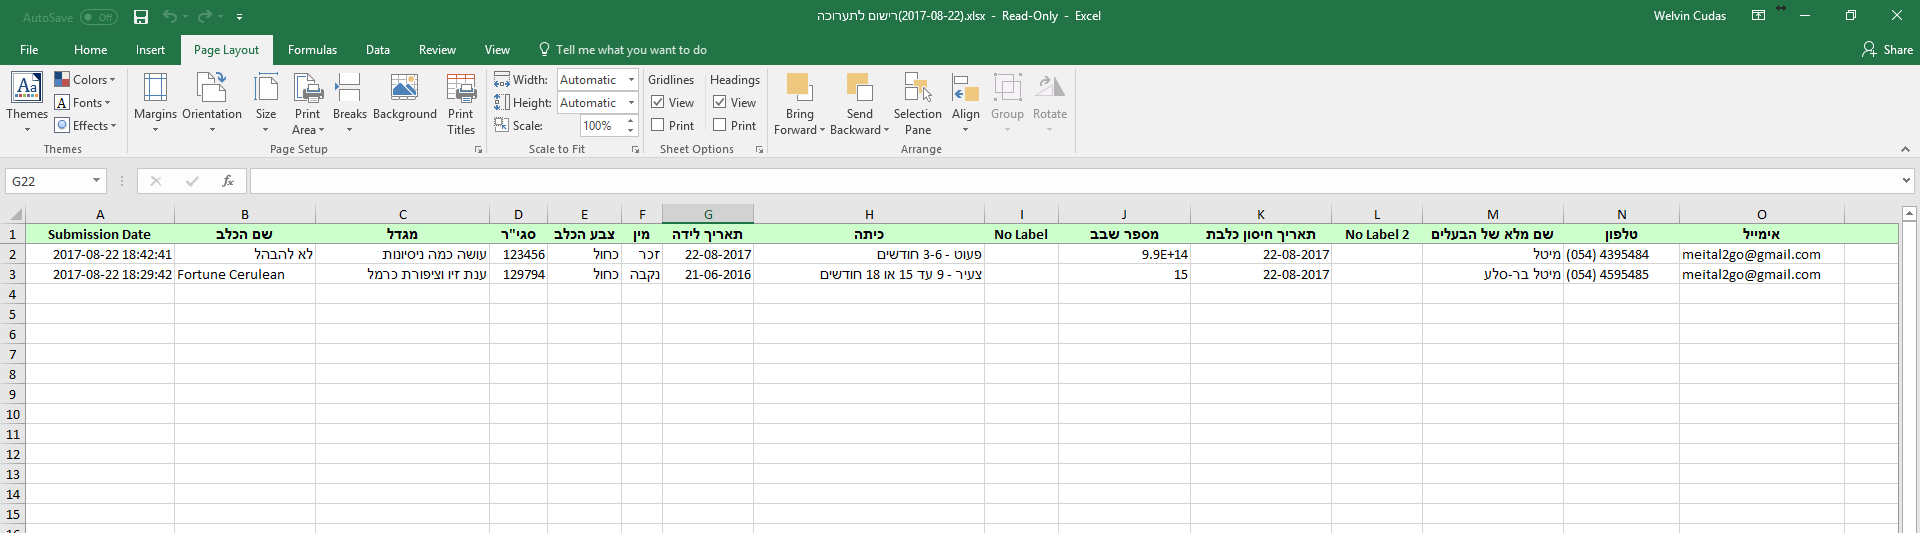 I have downloaded my submissions with Hebrew language as Excel but its unreadable Image 1 Screenshot 20